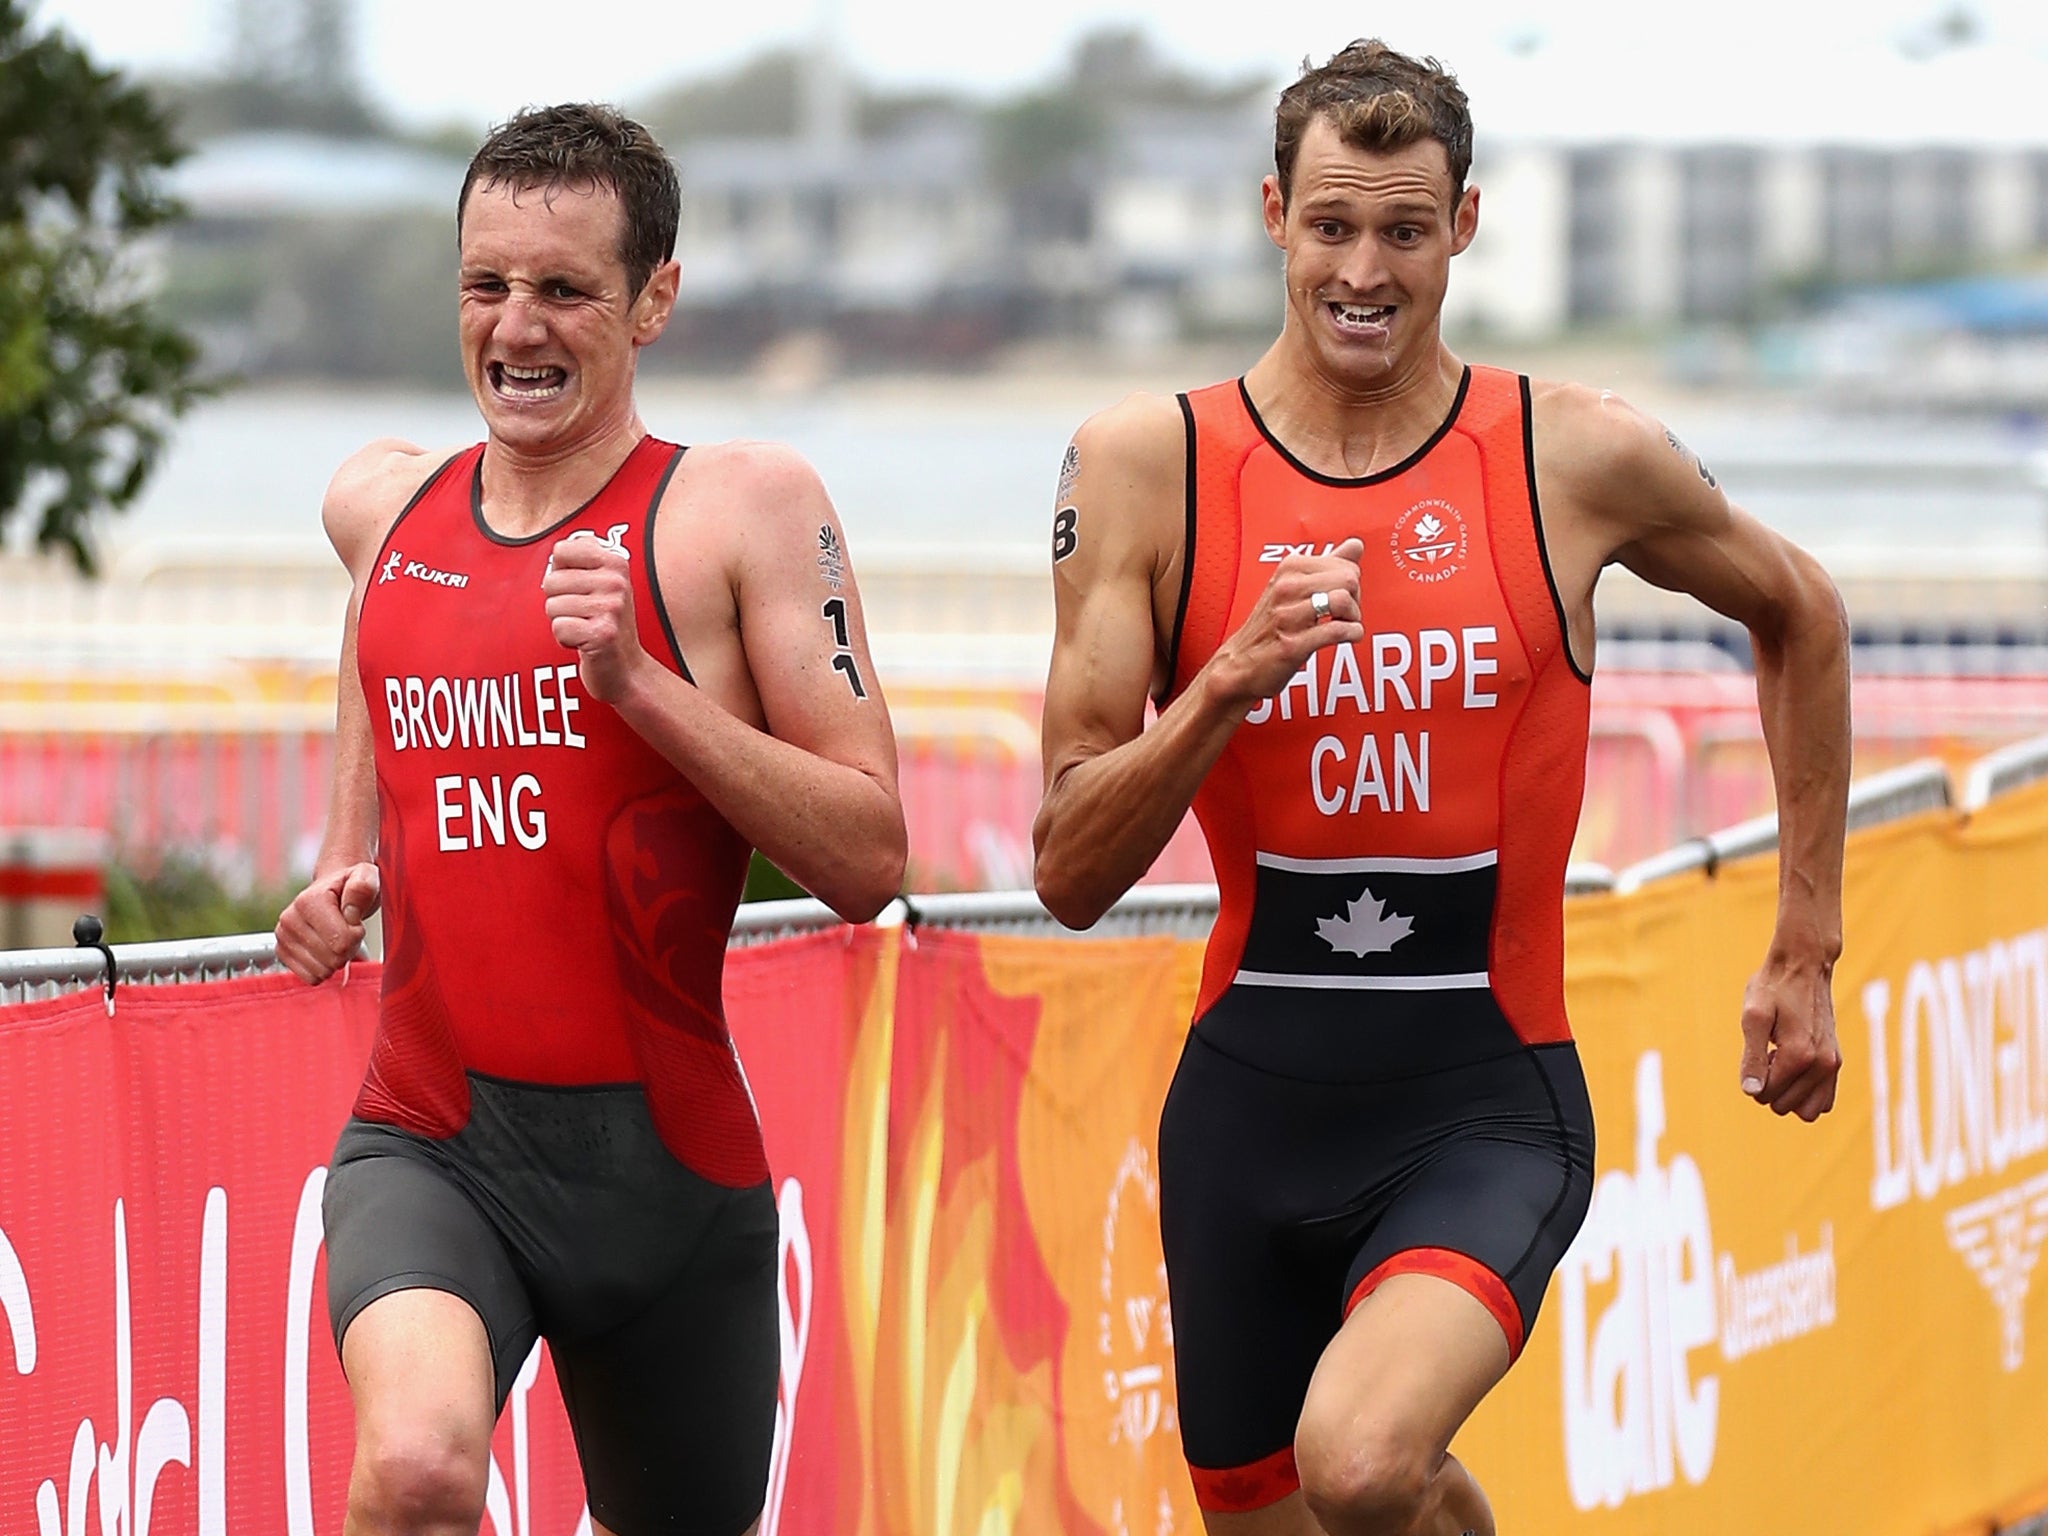 Two-time Olympic champion Alistair Brownlee struggled with a calf injury